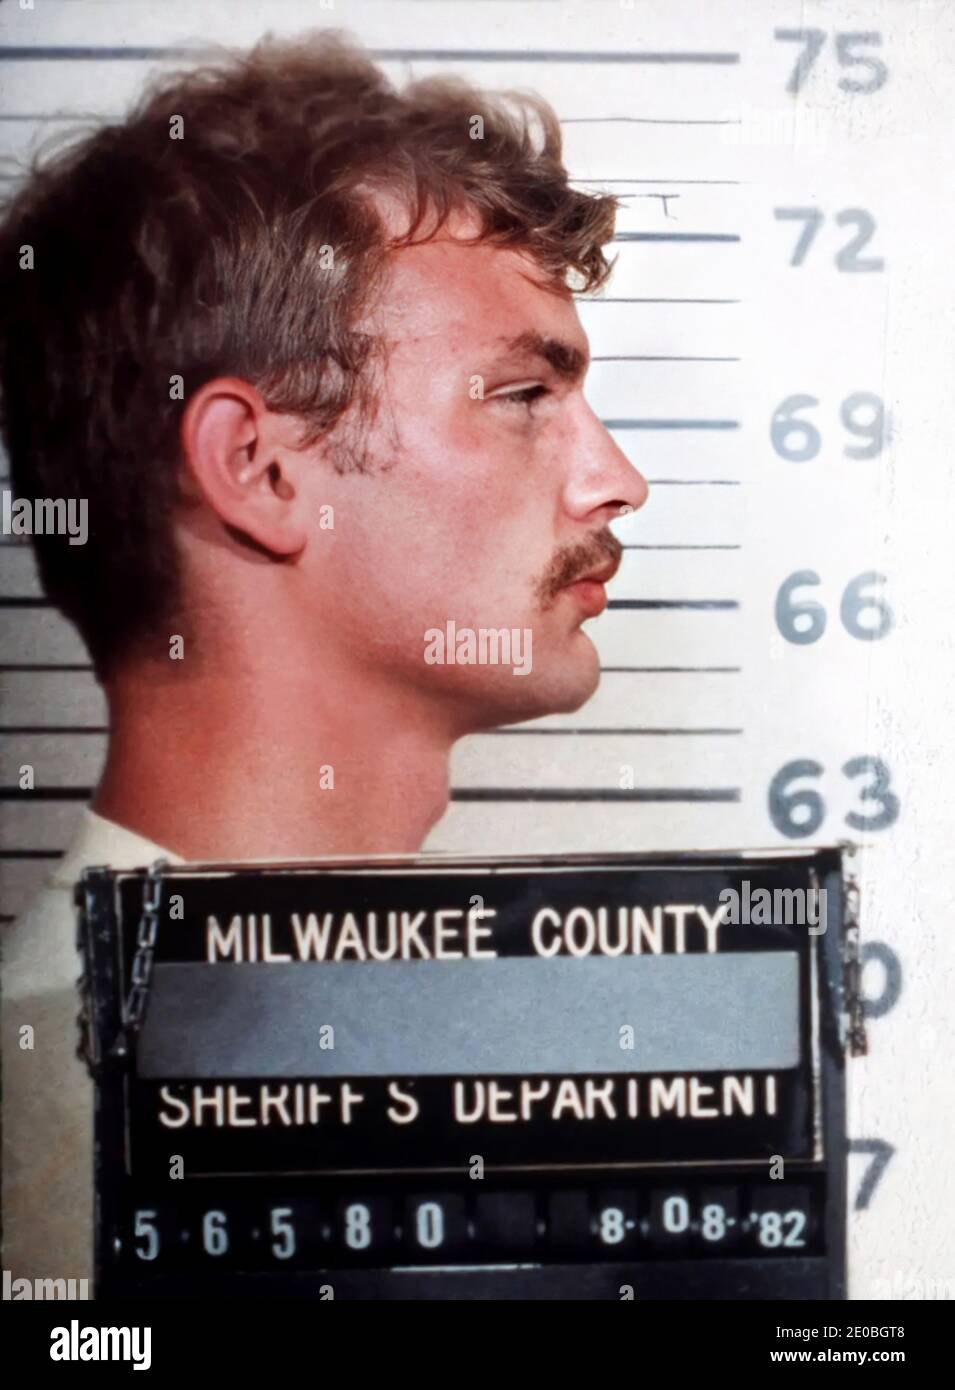 1982 , Milwaukee , USA : JEFFREY DAHMER aka the MILWAUKEE CANNIBAL ( 1960 - 1994 ) when was arrested  in a photobooth of Police Department the day 8 august 1982 . Dahmer was an American spree killer who murdered at least 17 people , from 1978 to 1991 . - SERIAL KILLER - Mostro di Milwaukee - The Monster of - portrait - ritratto - serial-killer - assassino seriale - CRONACA NERA - criminale - criminal - SERIAL KILLER  - GAY - LGBT - CANNIBALE - cannibalismo - omosessuale - omosessualità - homosexuality - homosexual - foto segnaletica della Polizia - photo booth - profile - profilo --- Archivio Stock Photo